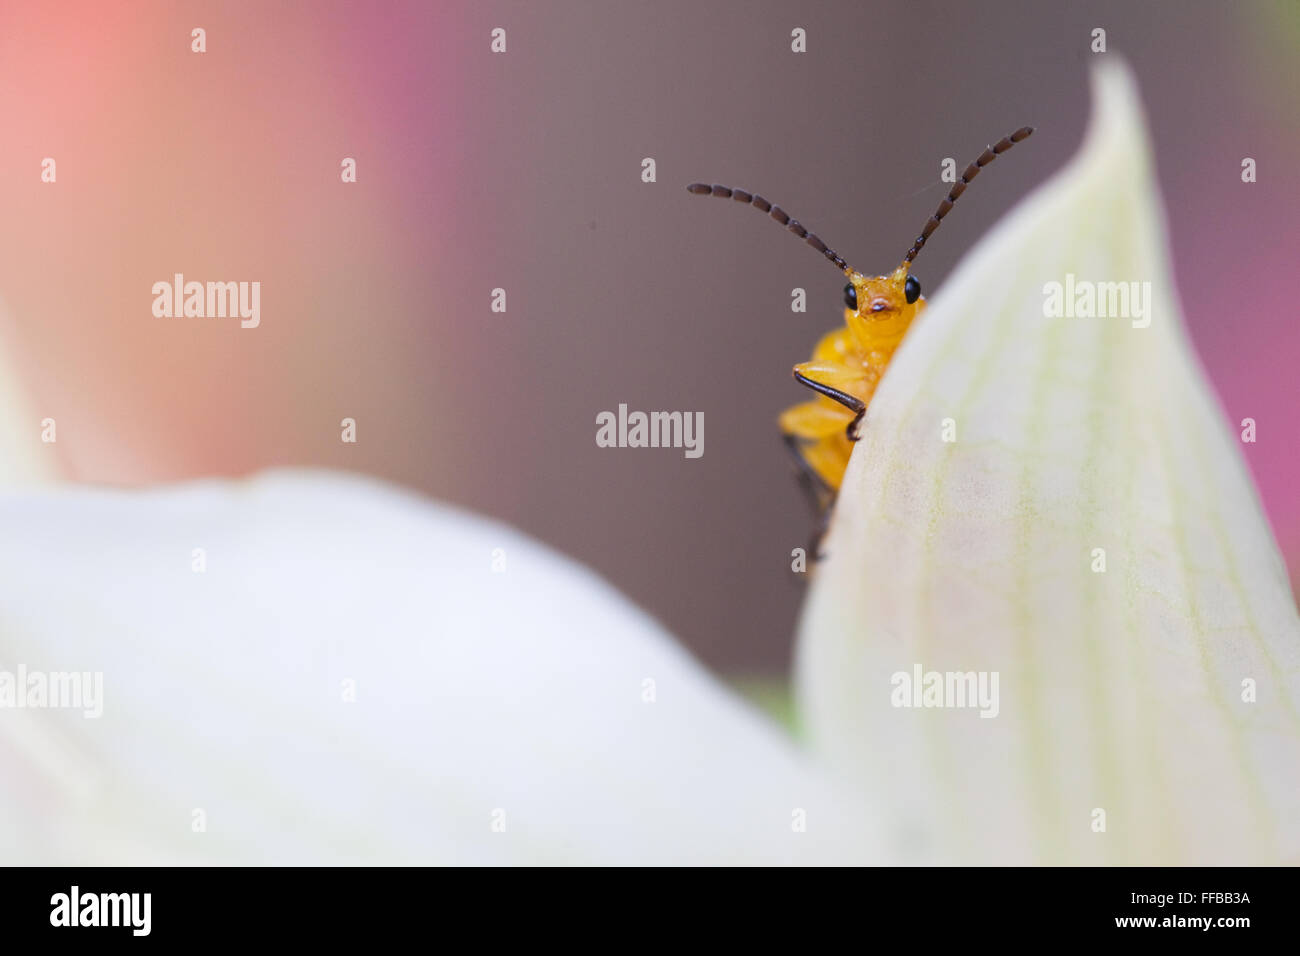 Beetle on the petals of a white flower Stock Photo